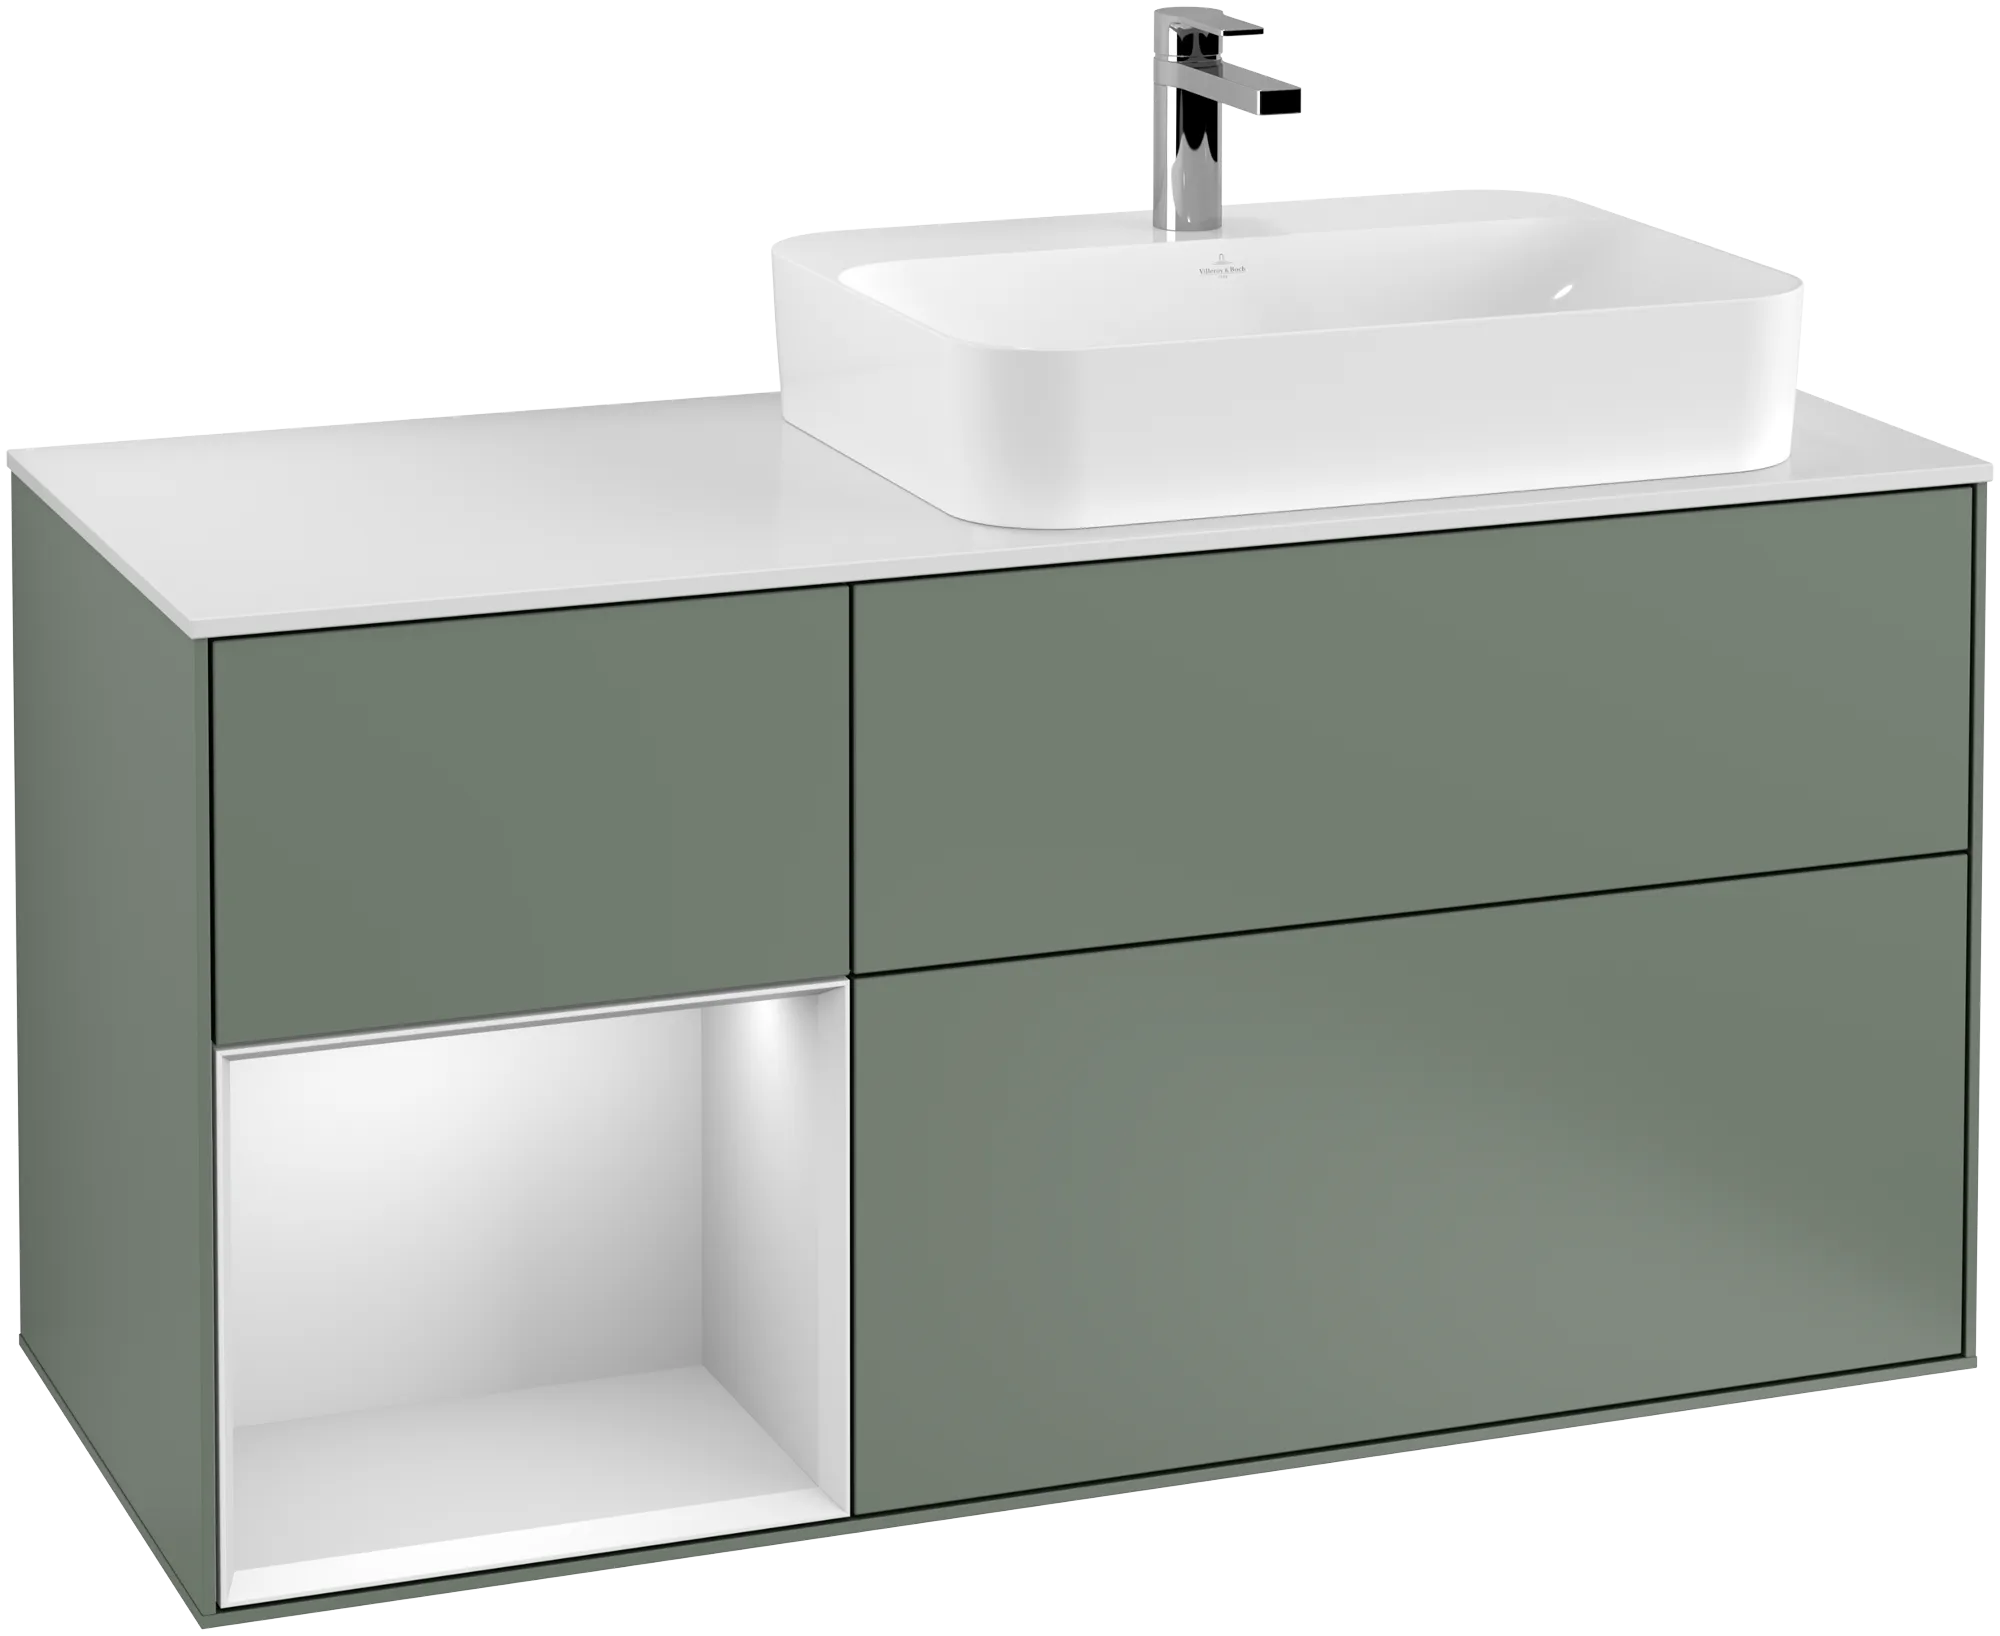 Picture of VILLEROY BOCH Finion Vanity unit, with lighting, 3 pull-out compartments, 1200 x 603 x 501 mm, Olive Matt Lacquer / White Matt Lacquer / Glass White Matt #G391MTGM